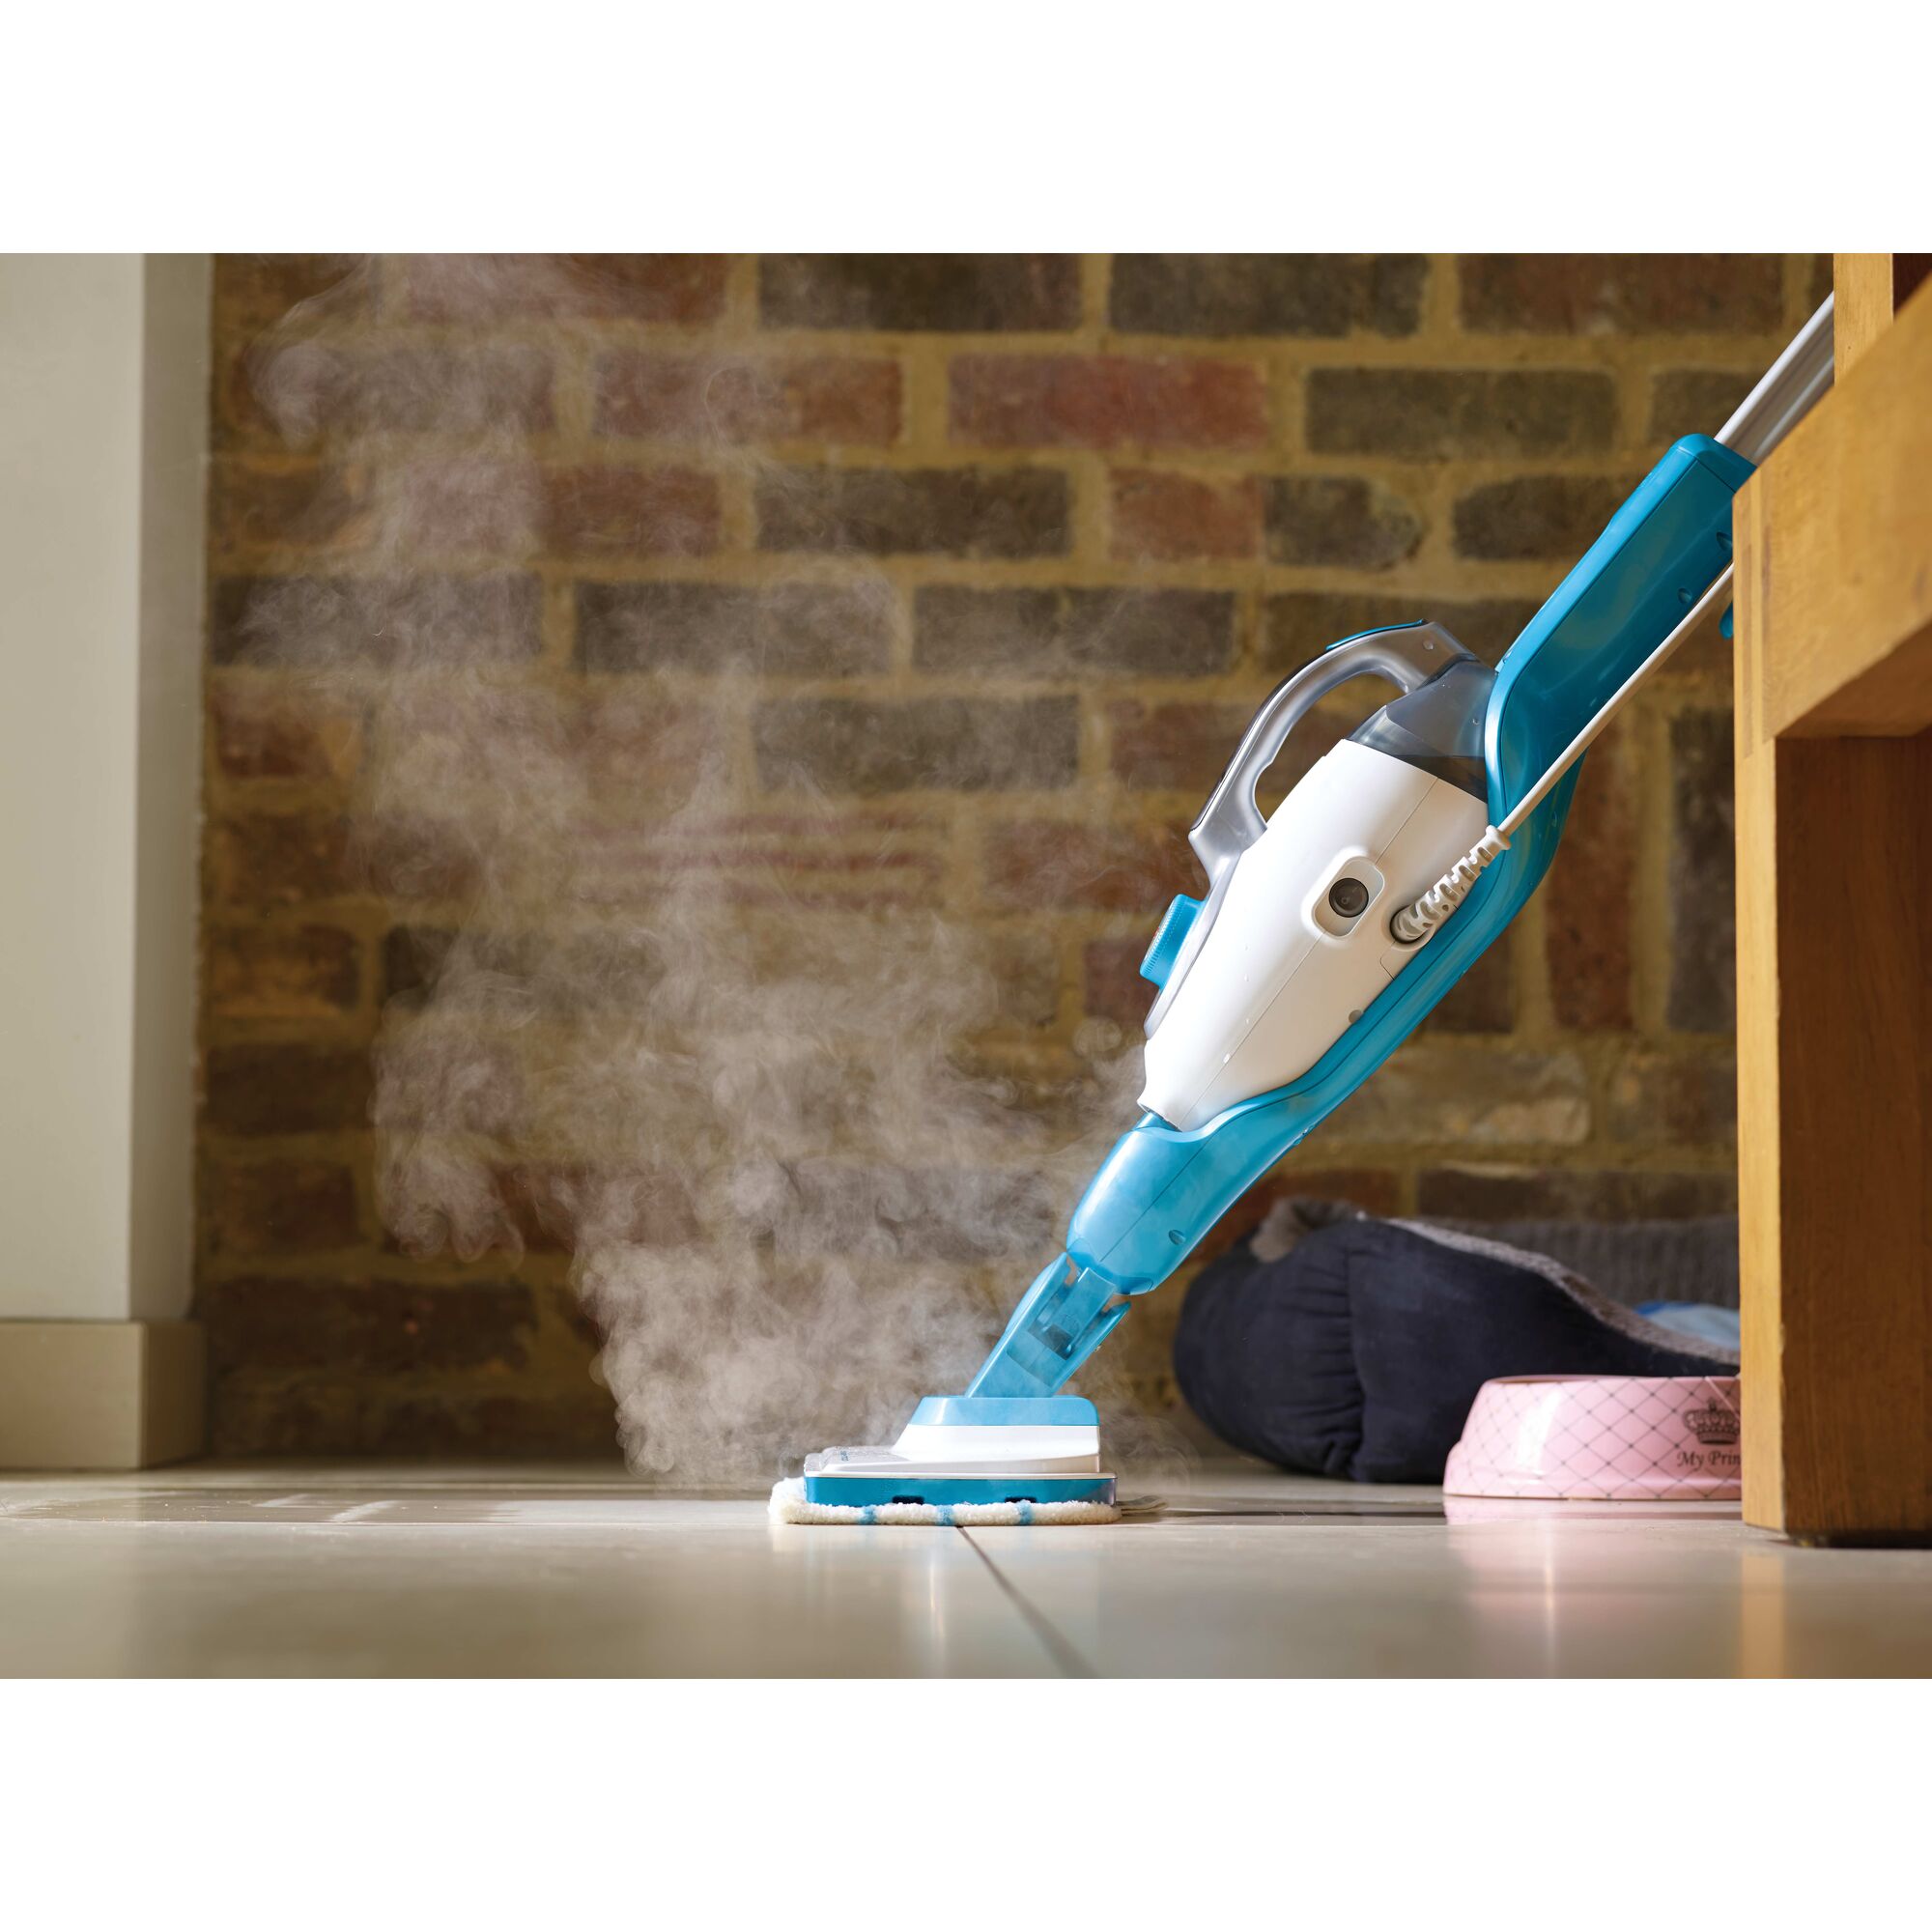 7 in 1 Steam Mop with steamglove handheld steamer being used to clean floor.